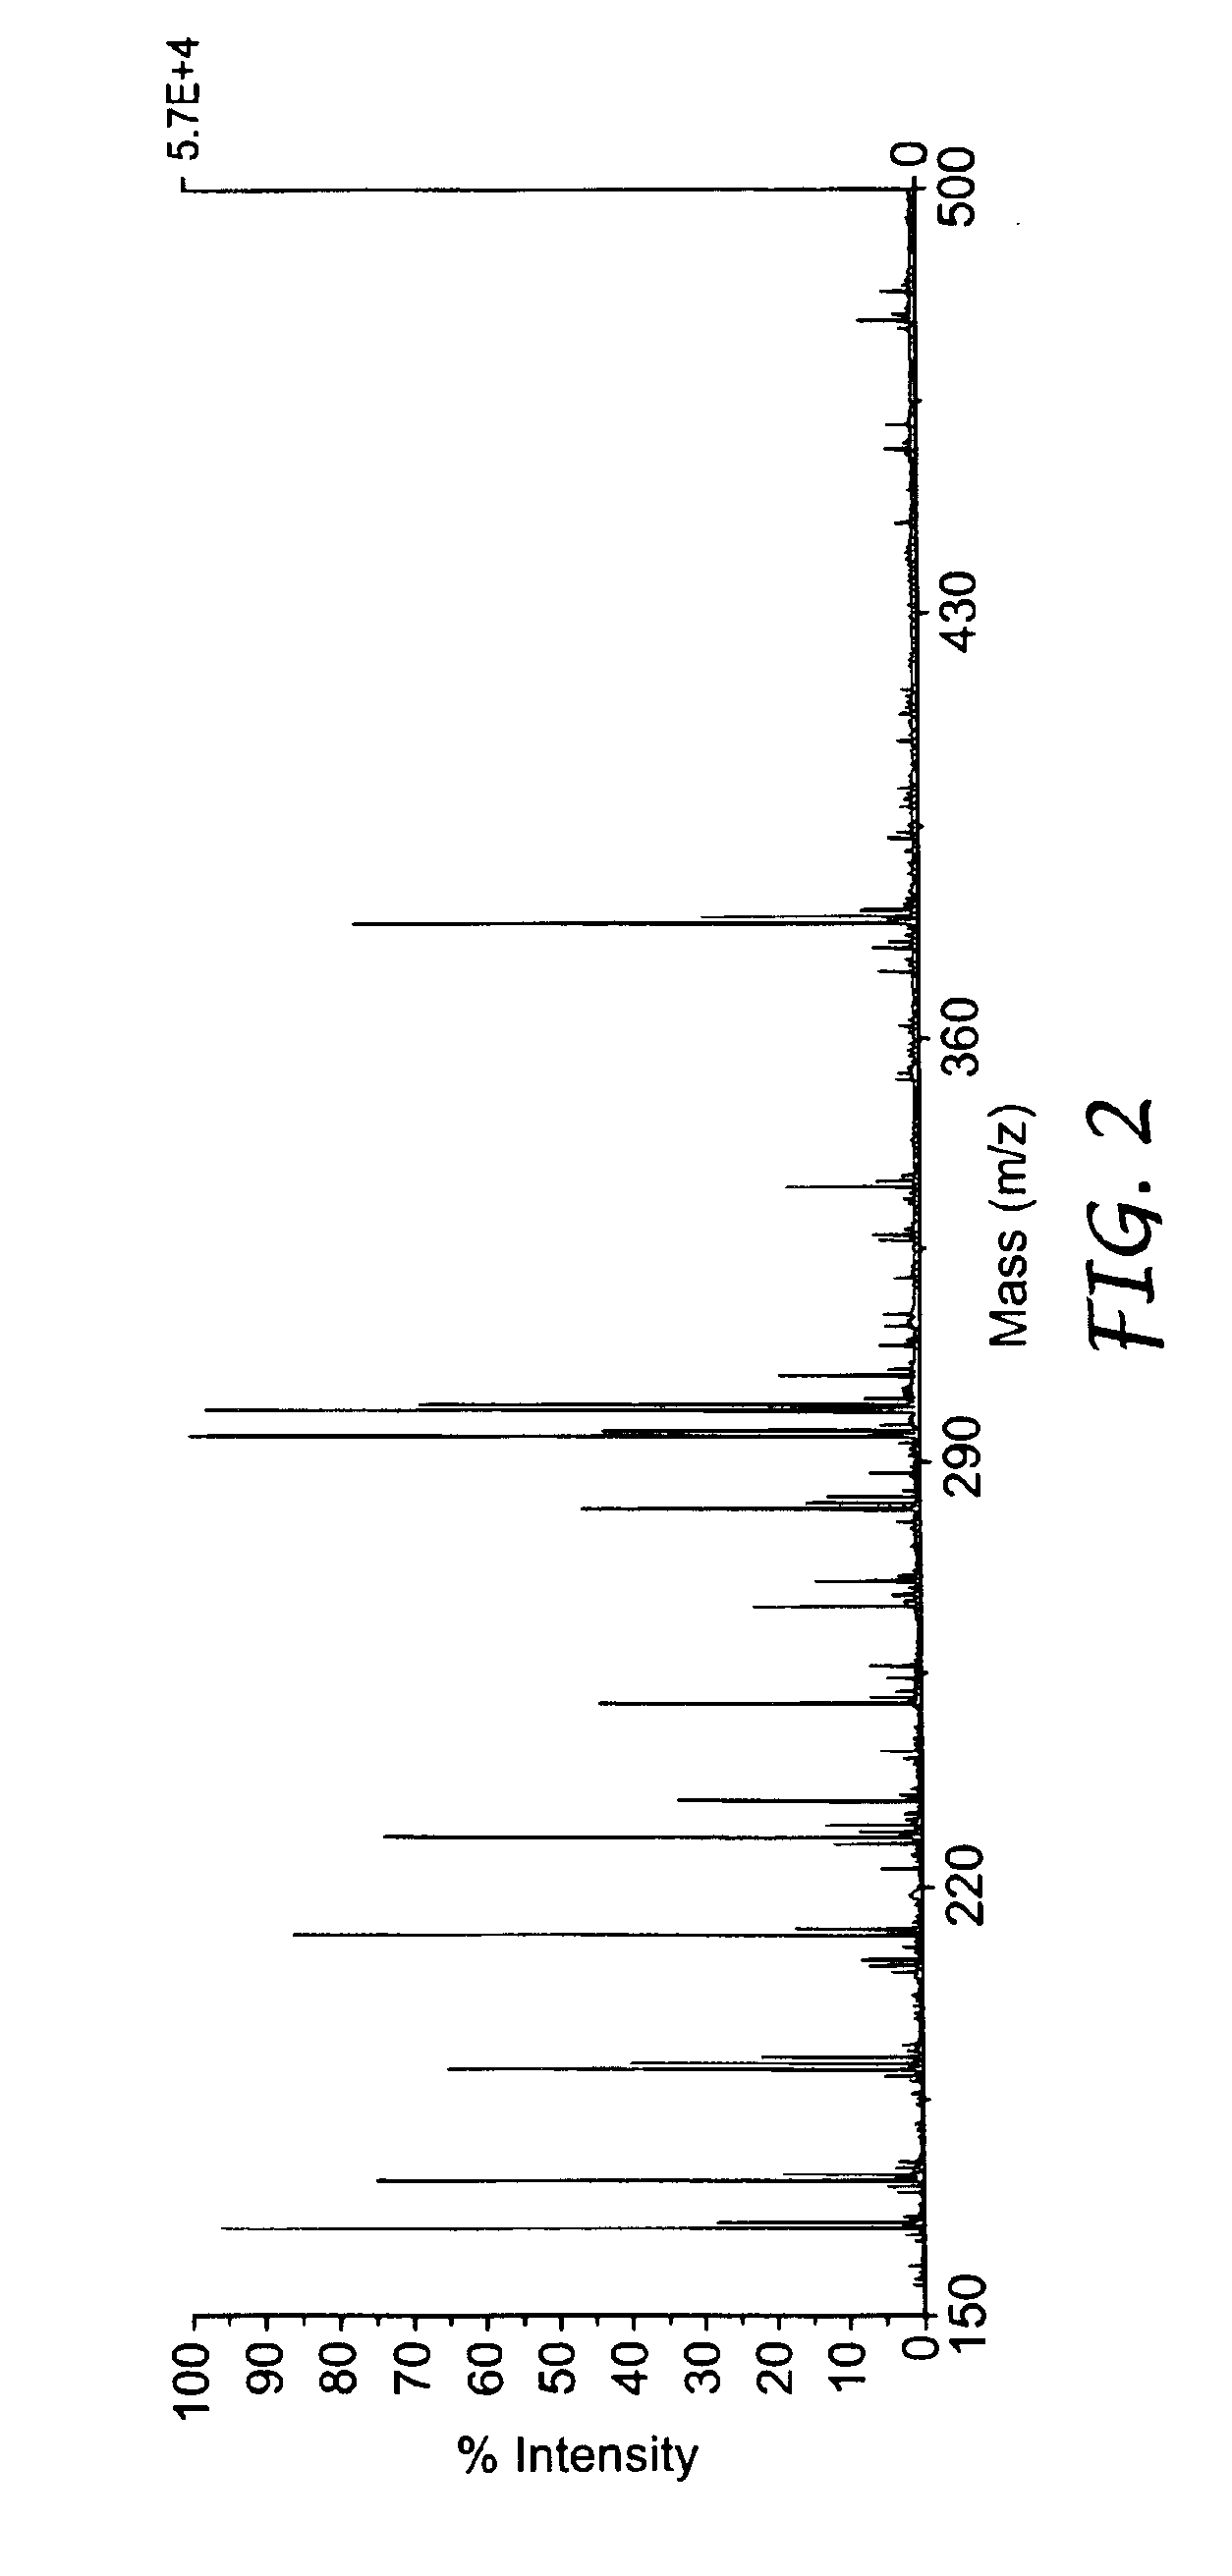 Microstructured polymeric substrate